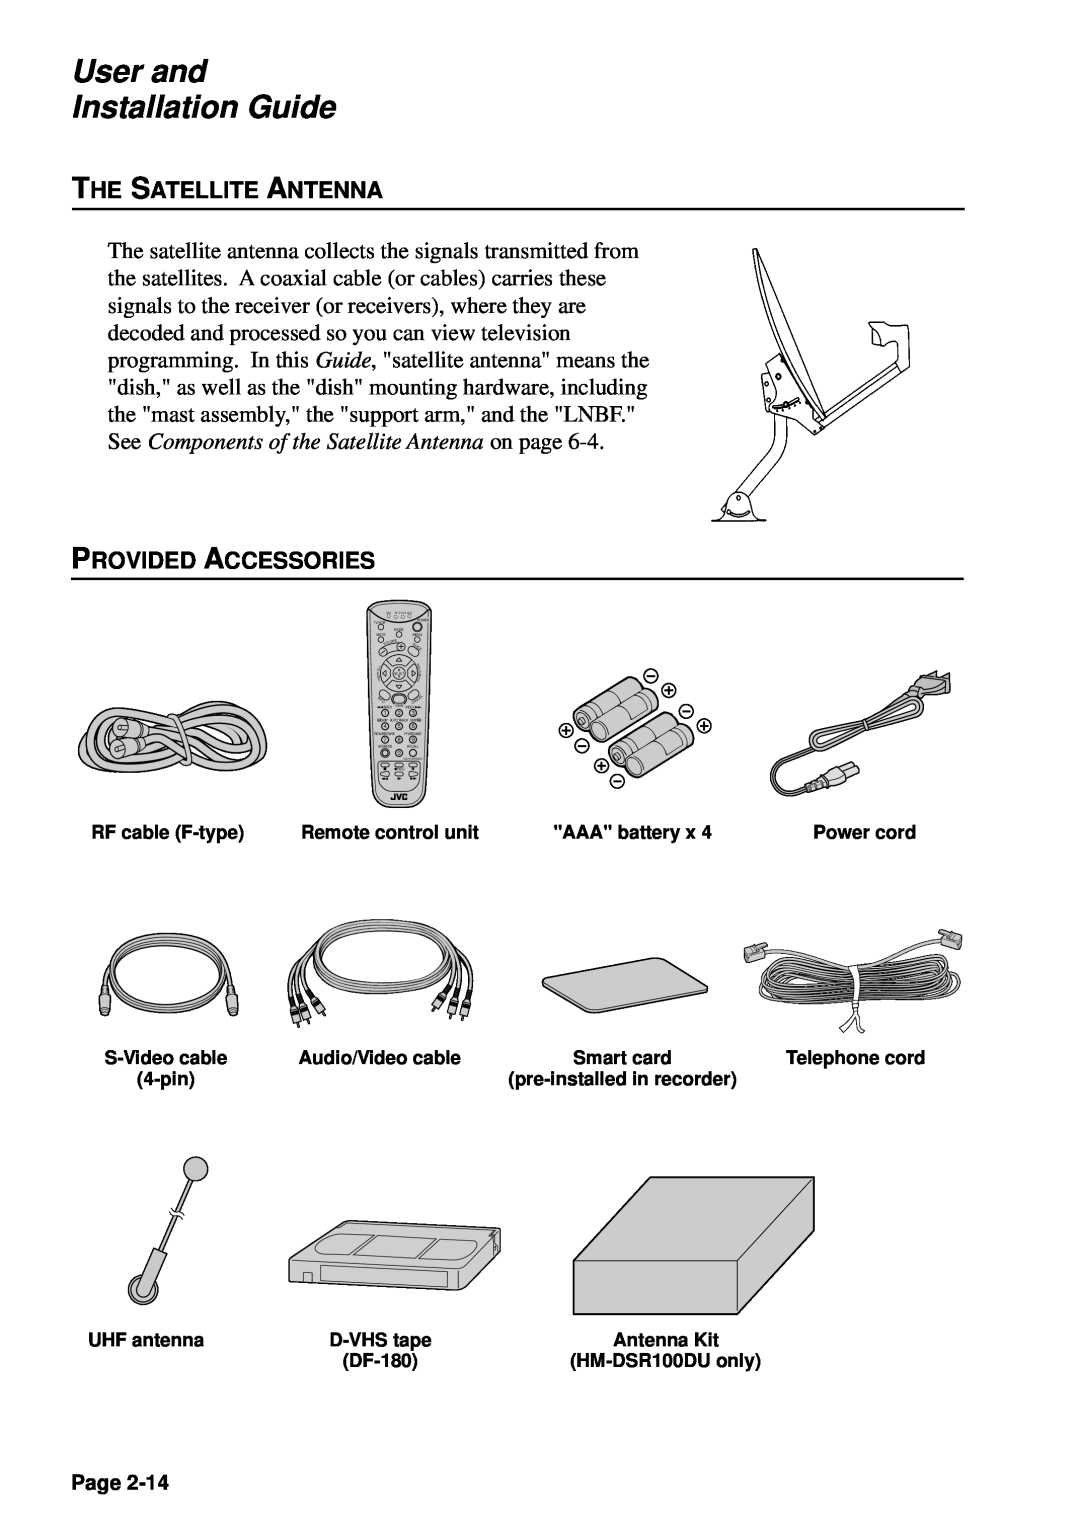 JVC HM-DSR100RU manual User and Installation Guide, The Satellite Antenna, Provided Accessories 